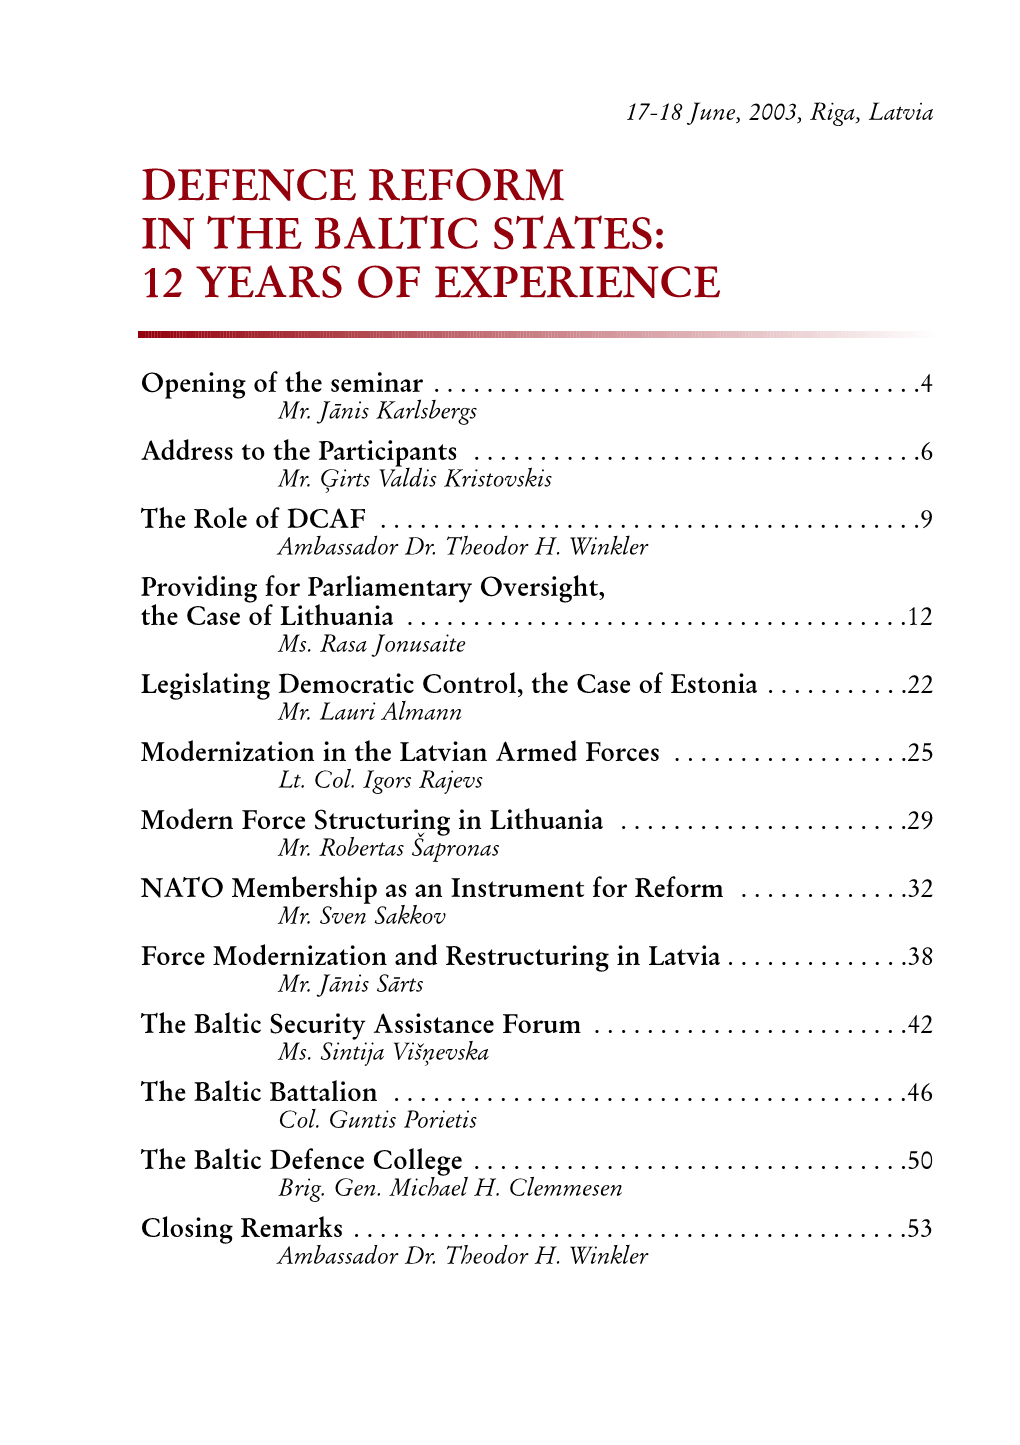 Defence Reform in the Baltic States: 12 Years of Experience